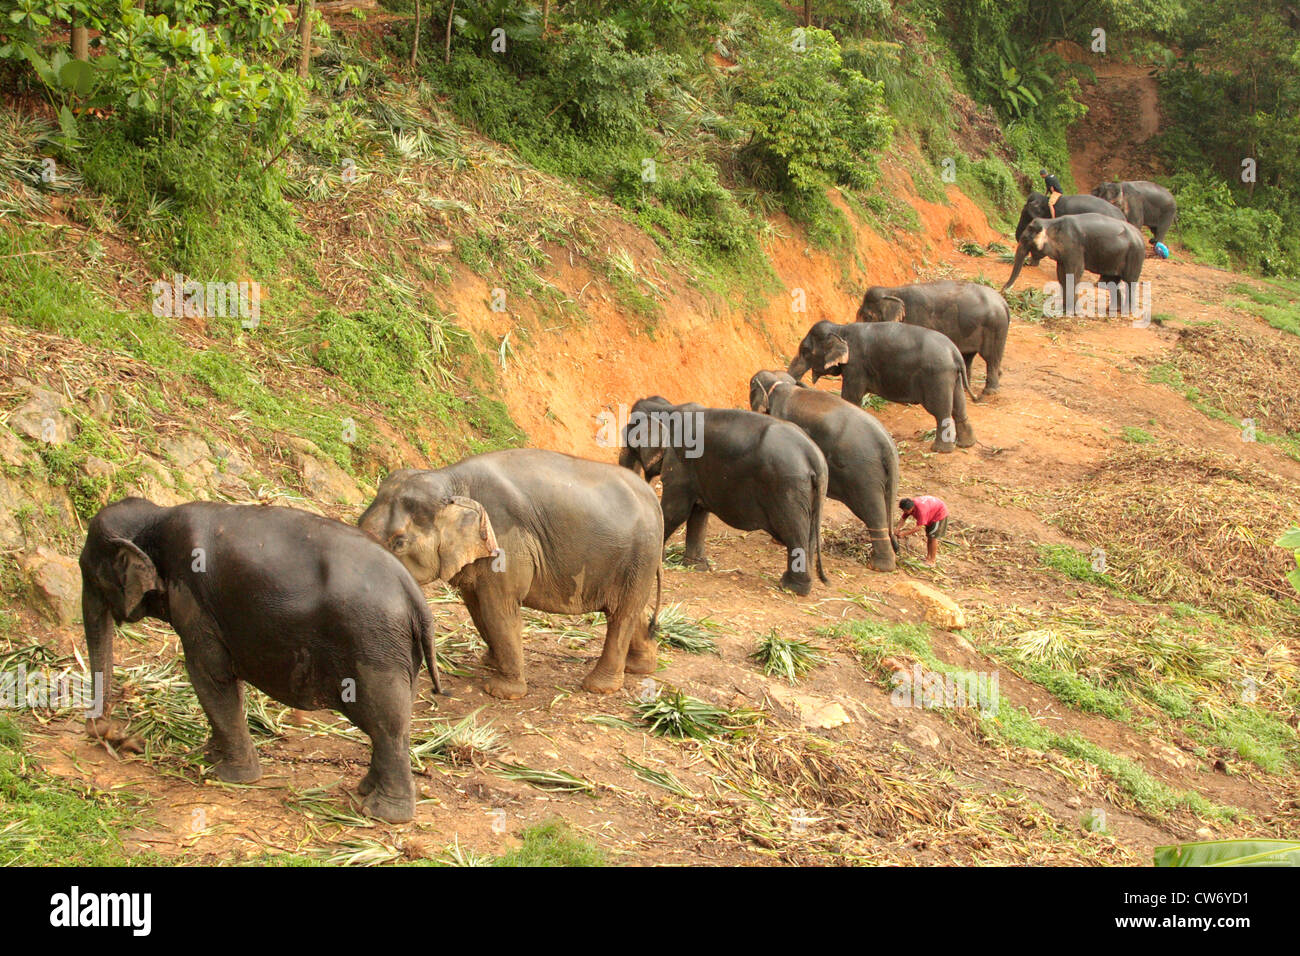 Indian elephant (Elephas maximus indicus, Elephas maximus bengalensis), working elephants beeing fed in the evening with pineapple leaves, Thailand, Phuket Stock Photo